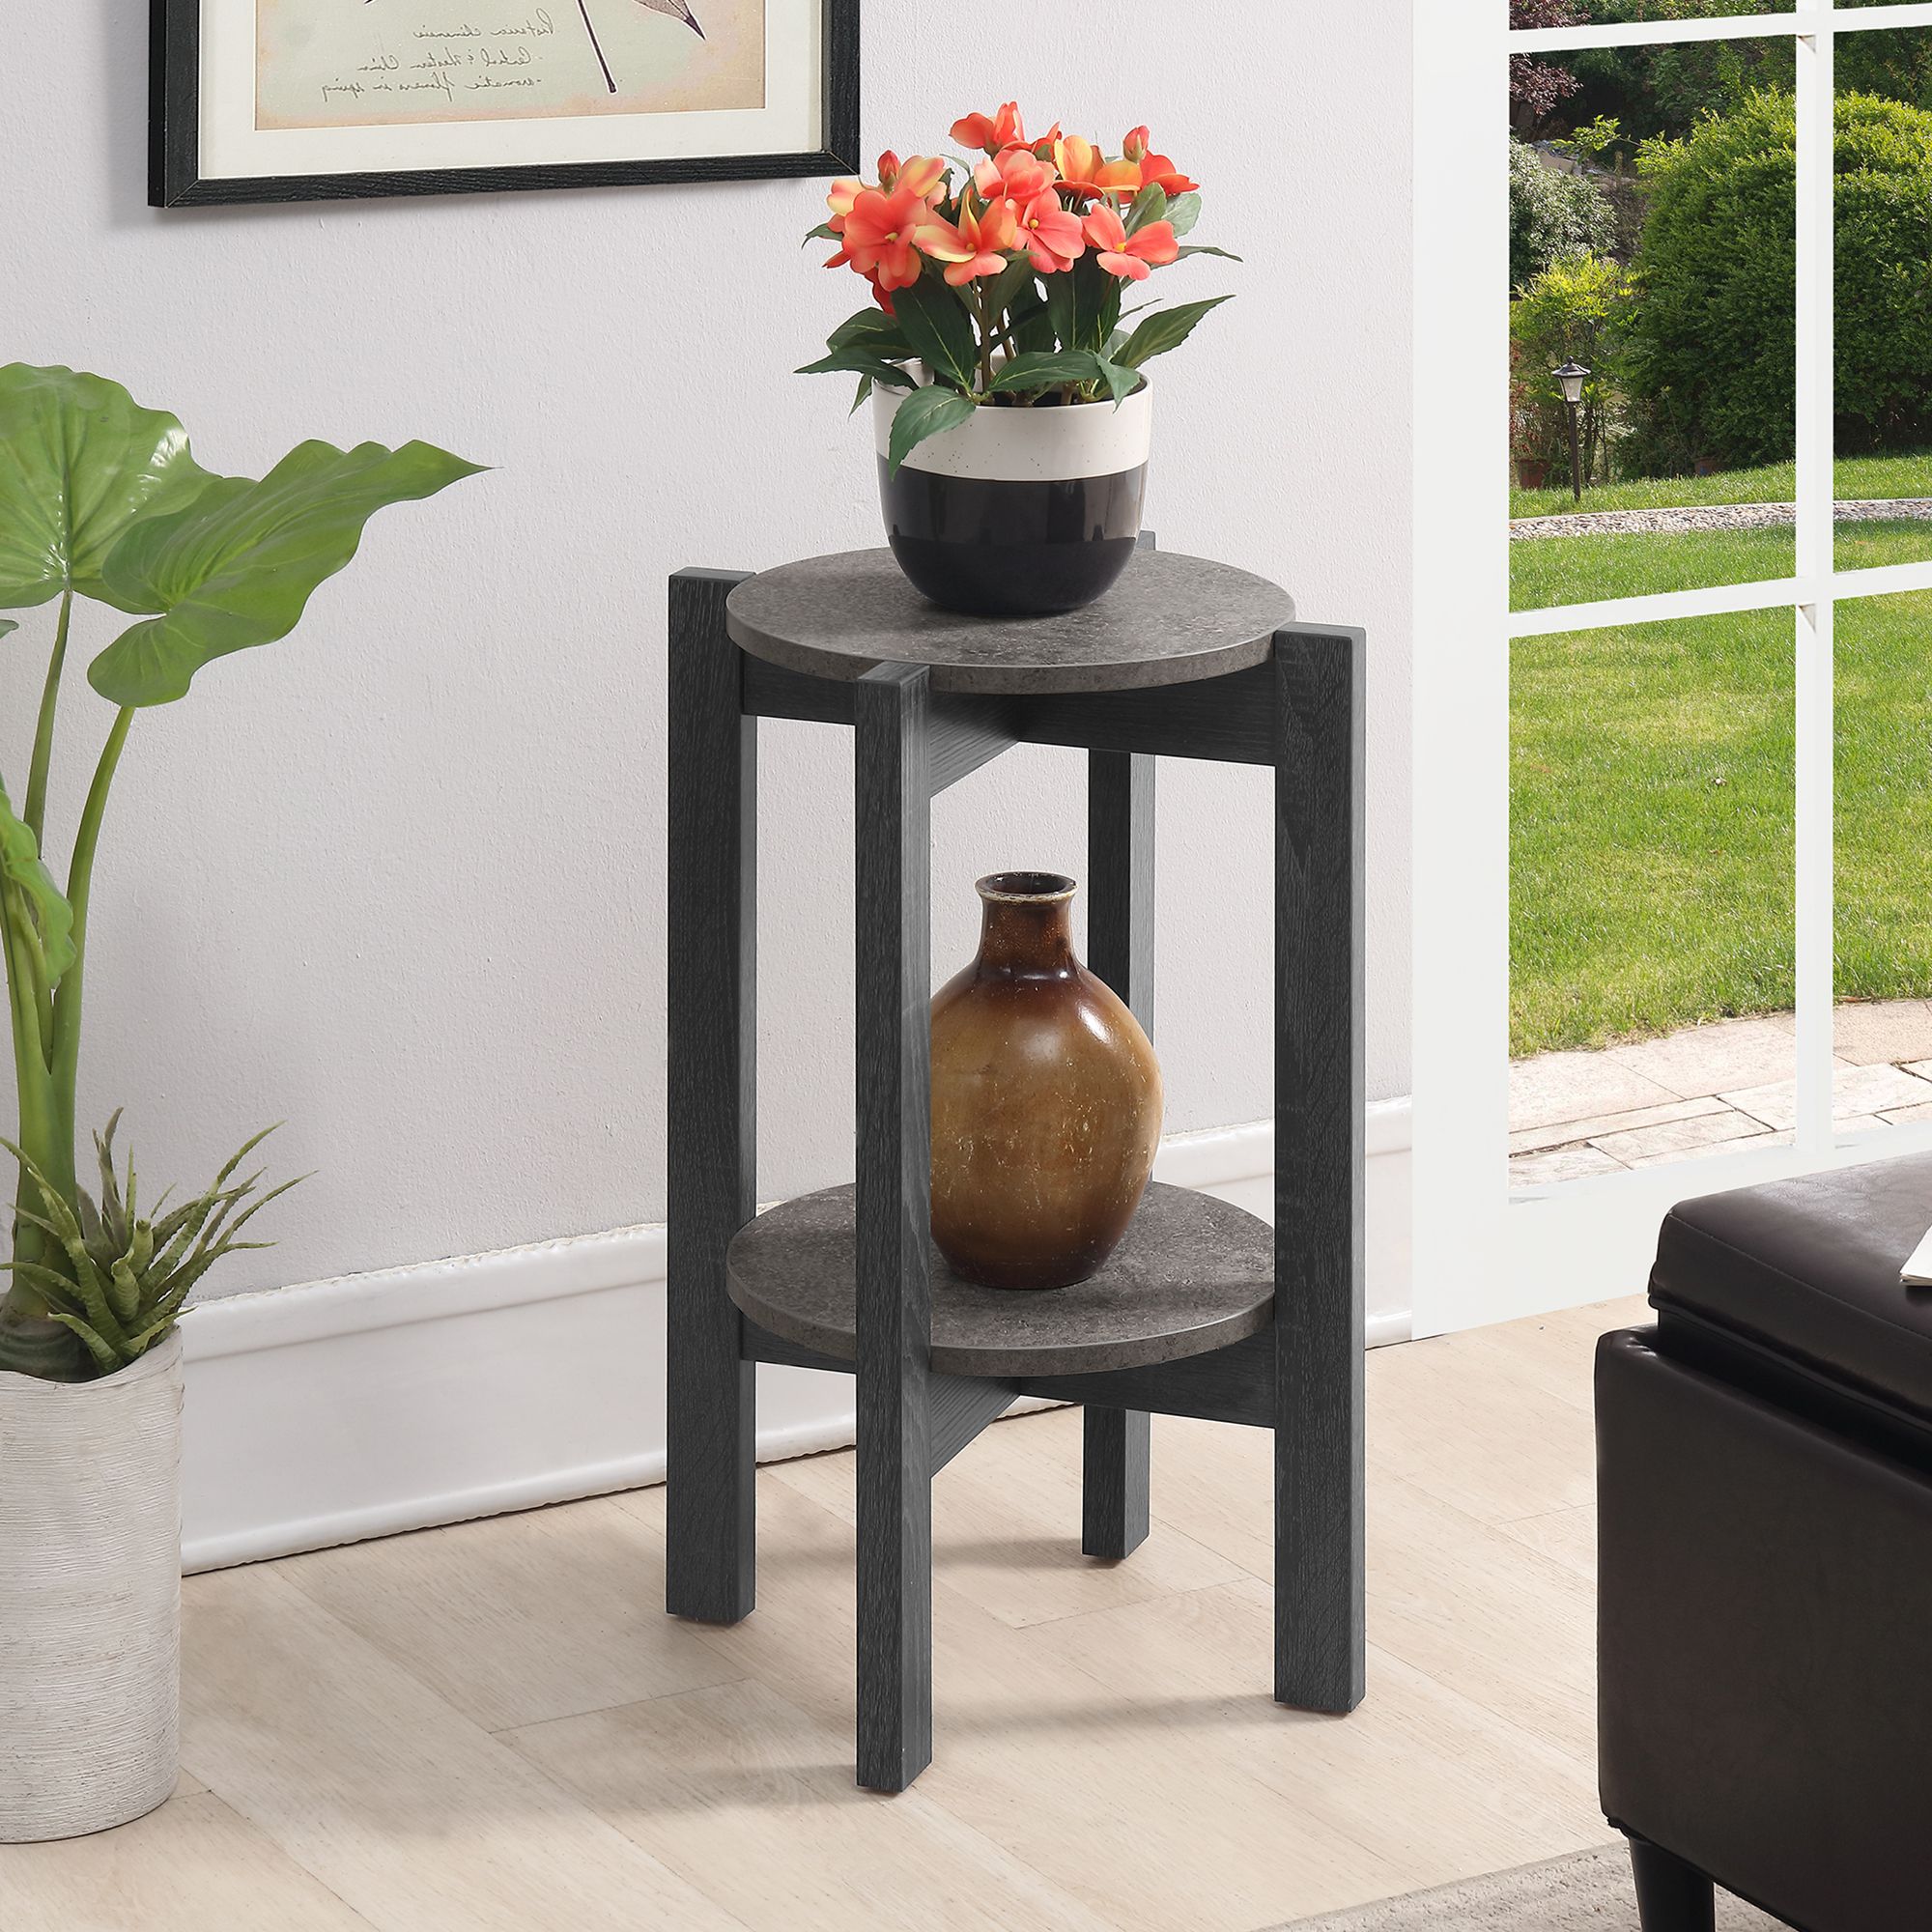 Newport Medium 2 Tier Plant Stand, Faux Cement/weathered Gray – Walmart In Weathered Gray Plant Stands (View 6 of 15)